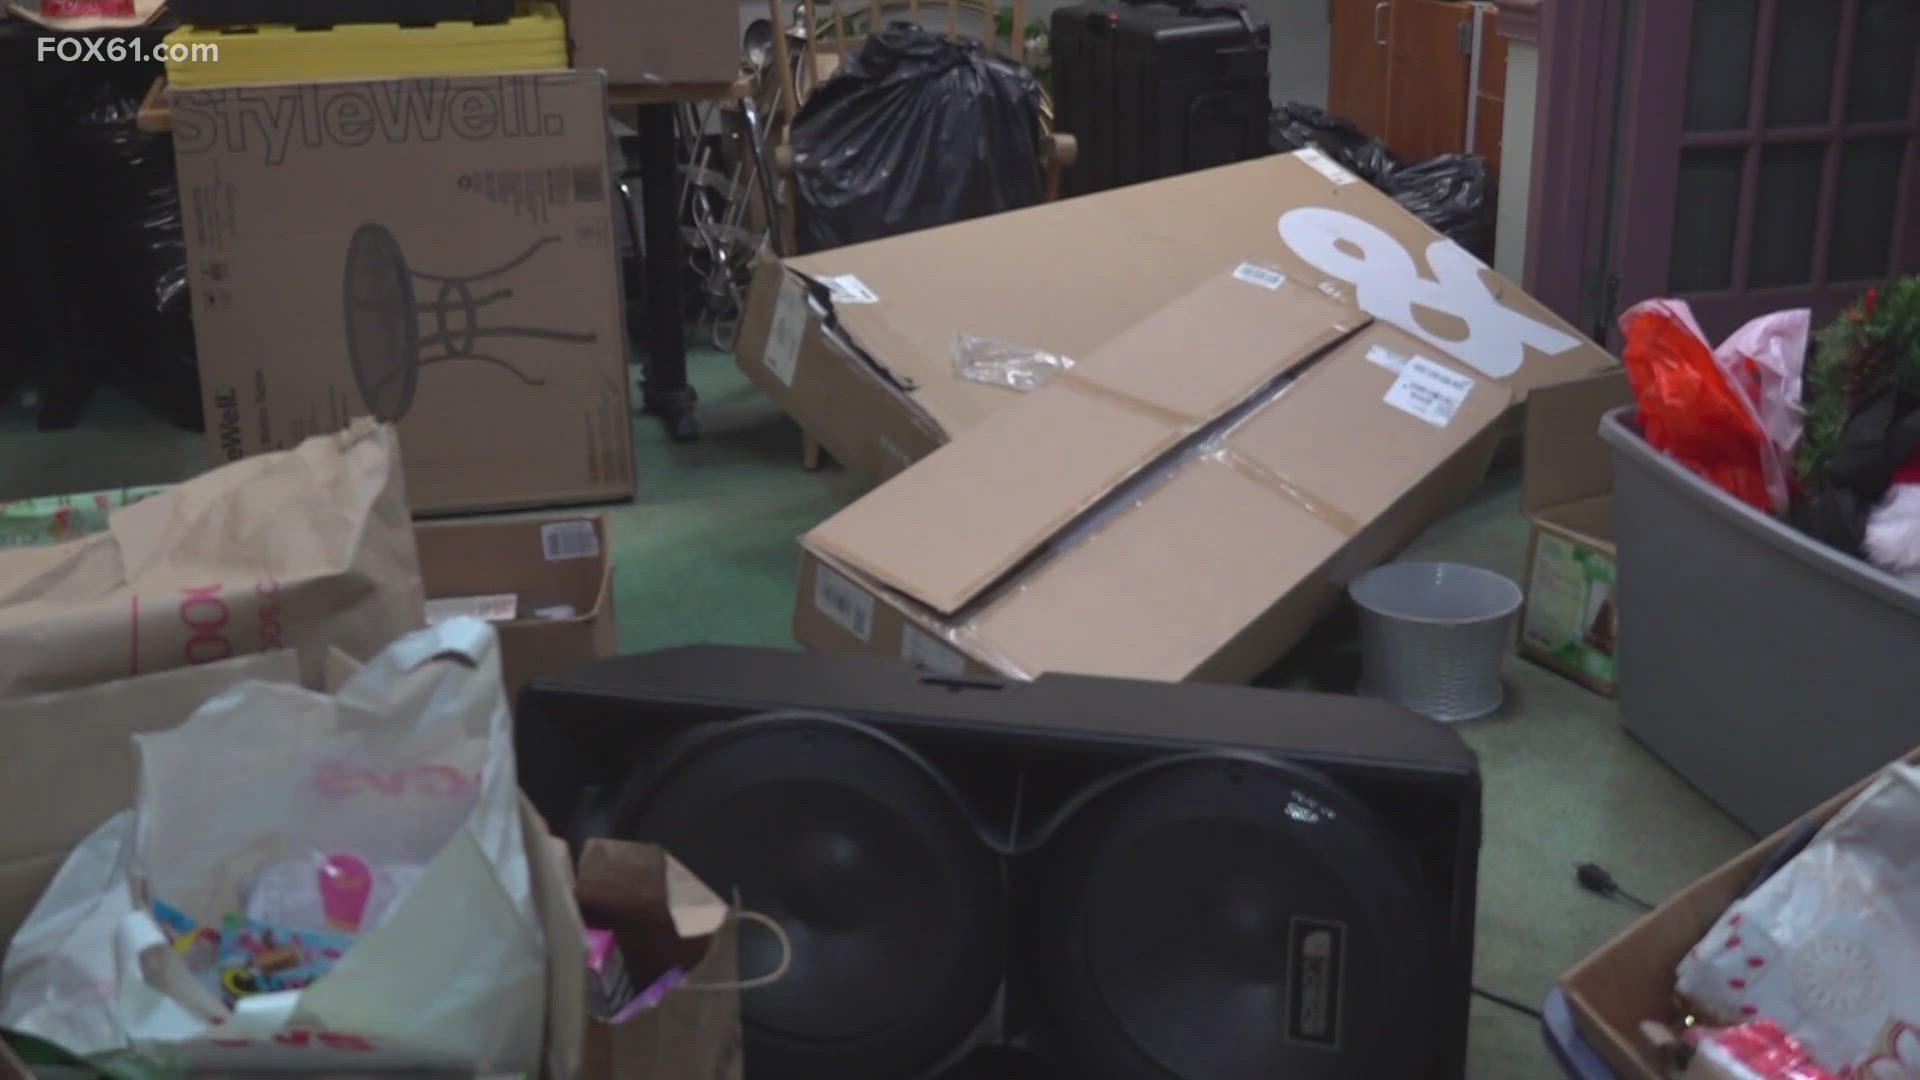 Angel of Edgewood in Hartford is picking up the pieces after thieves burglarized the non-profit's warehouse.